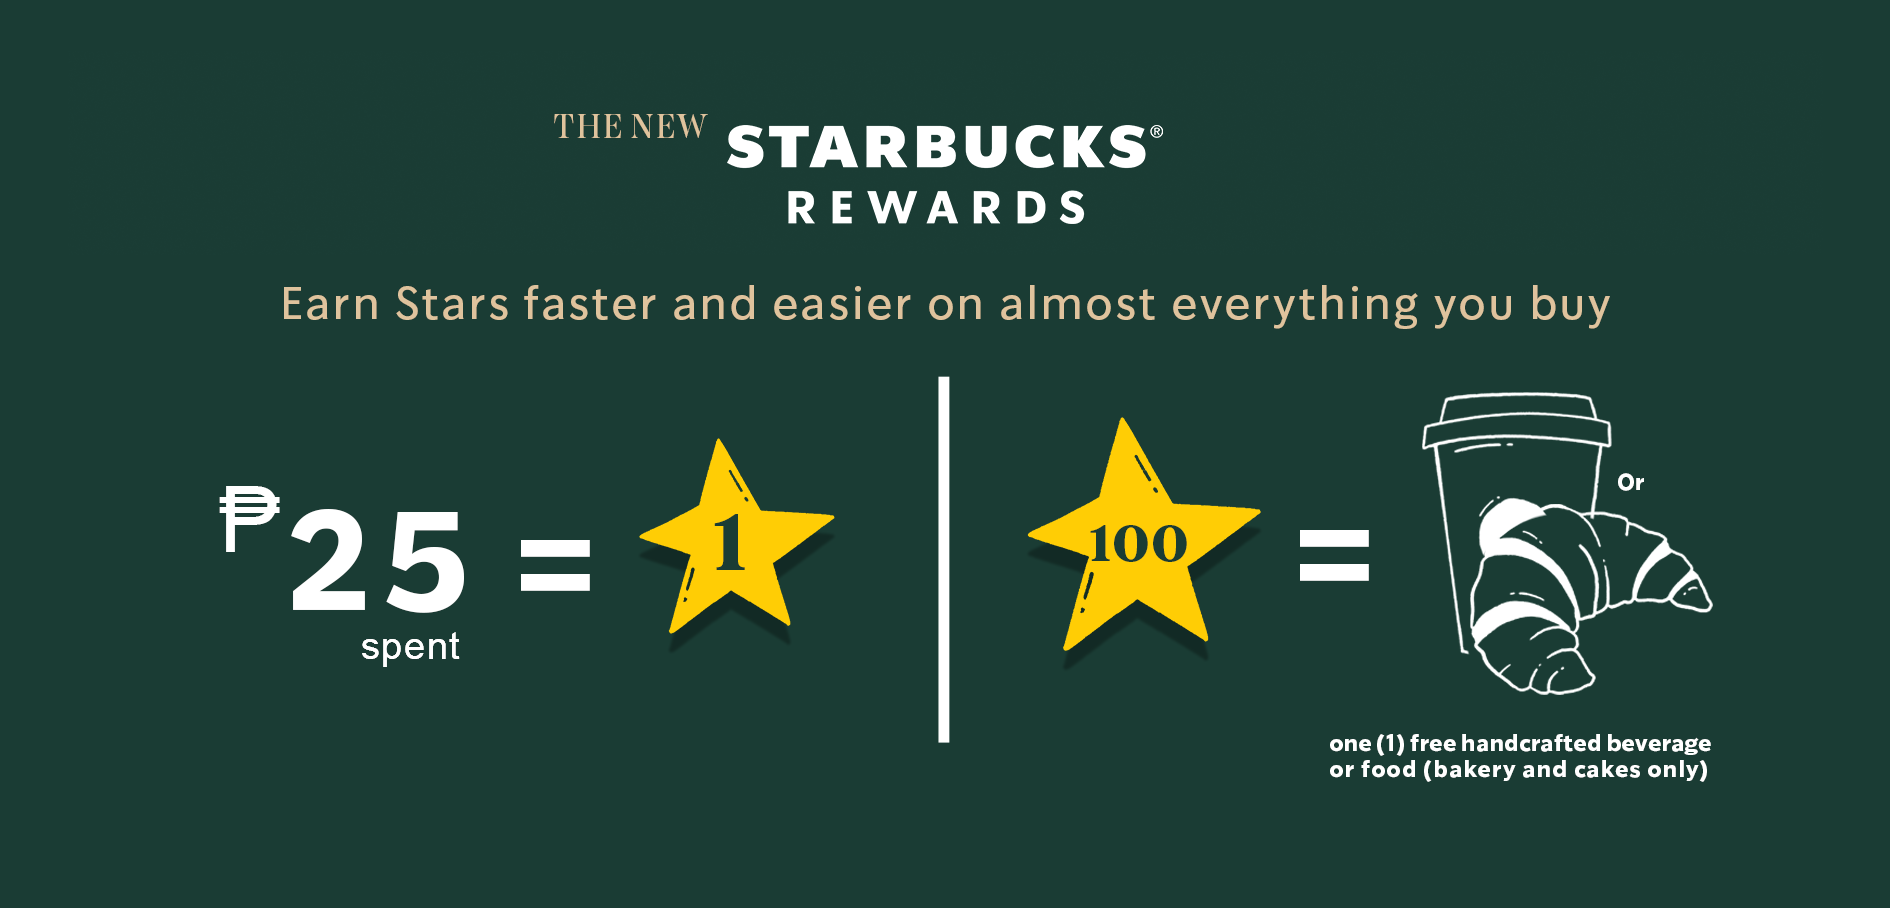 All The Details About The New Starbucks Rewards Program